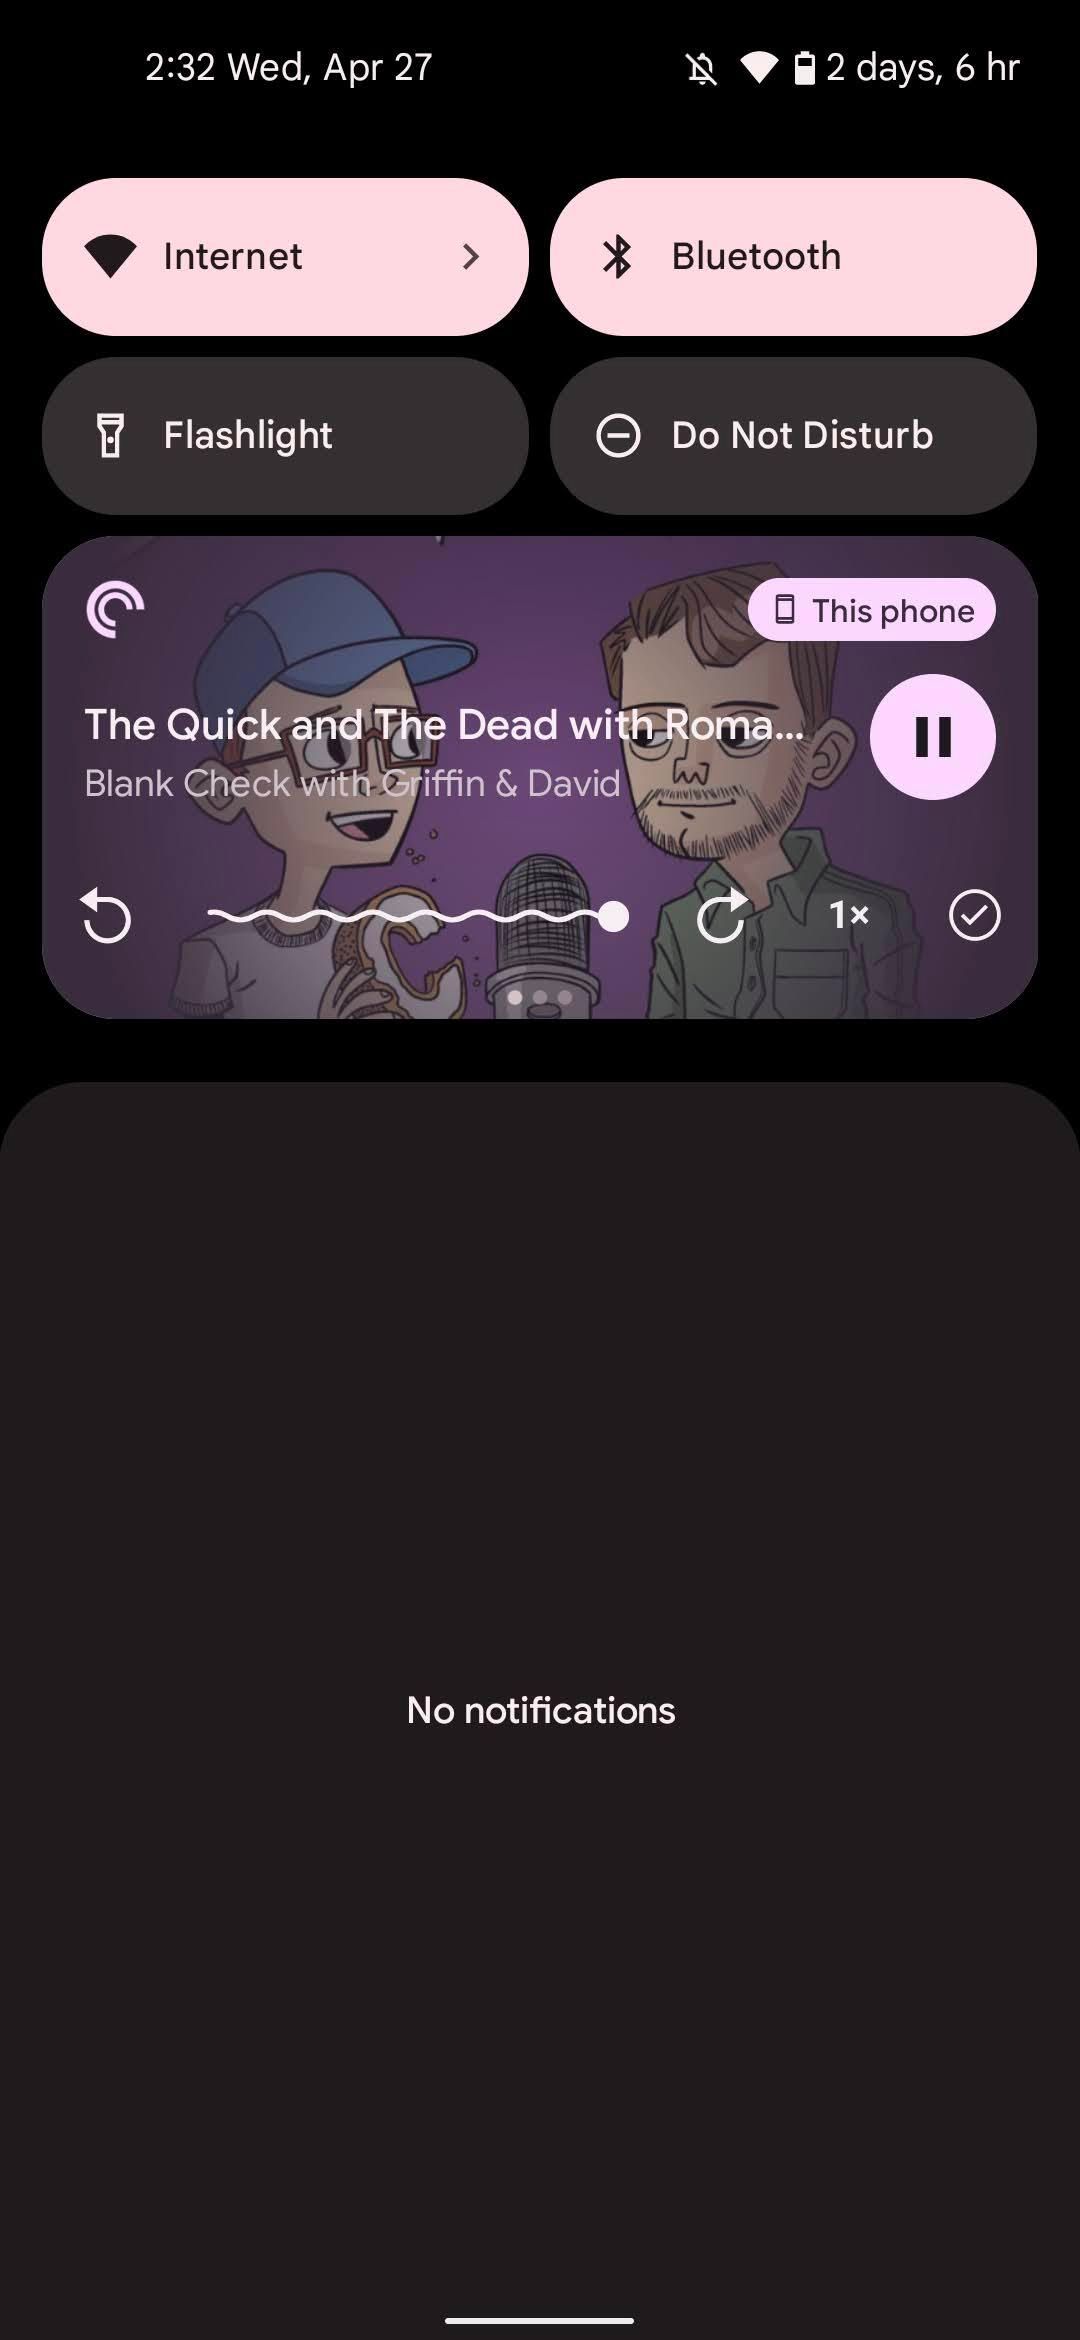 Android-13-Now-Playing-Pocket-Casts